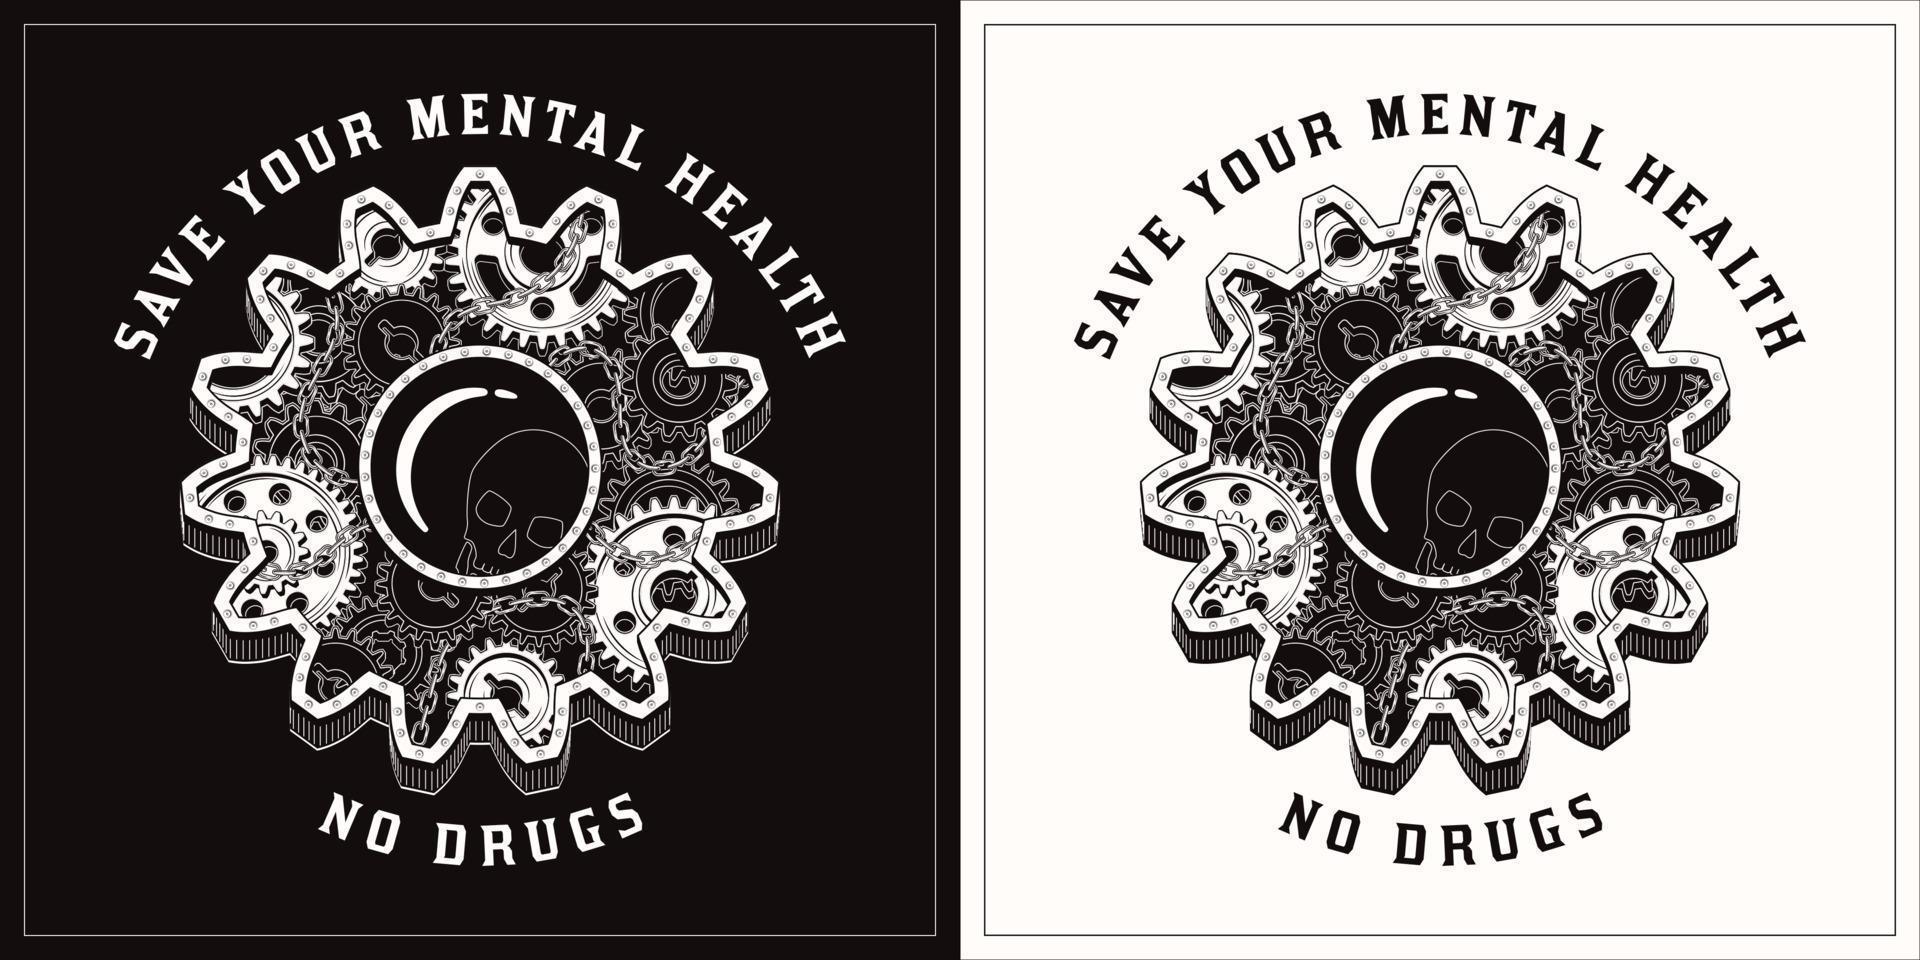 Monochrome gear label in vintage style with gears, metal rail, rivets. Silhouette of skull inside of lens. Concept of healthy life without drugs. Save your mental health No drugs. vector